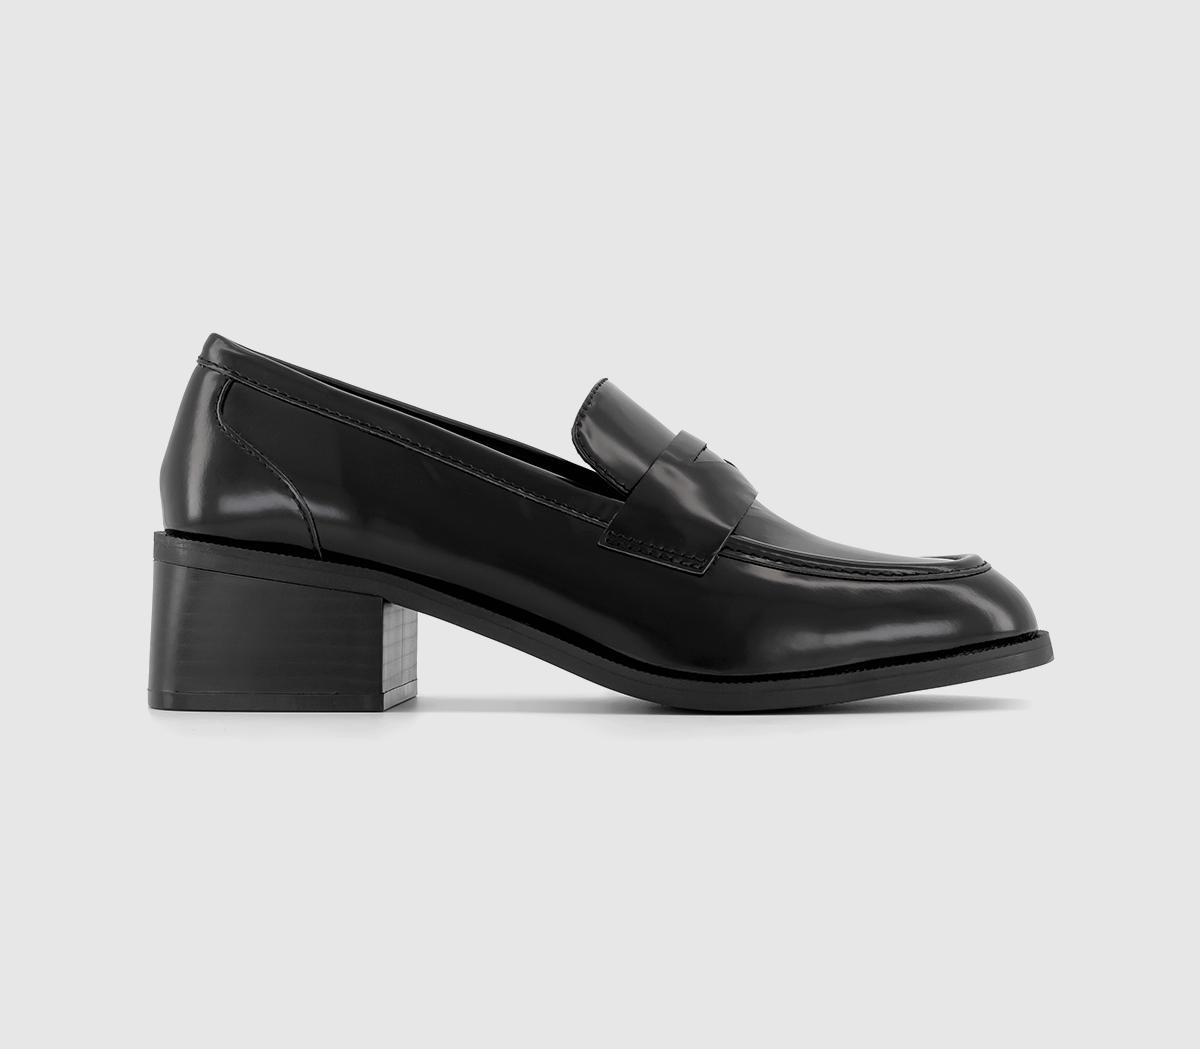 OFFICEFletching Heeled LoafersBlack Leather